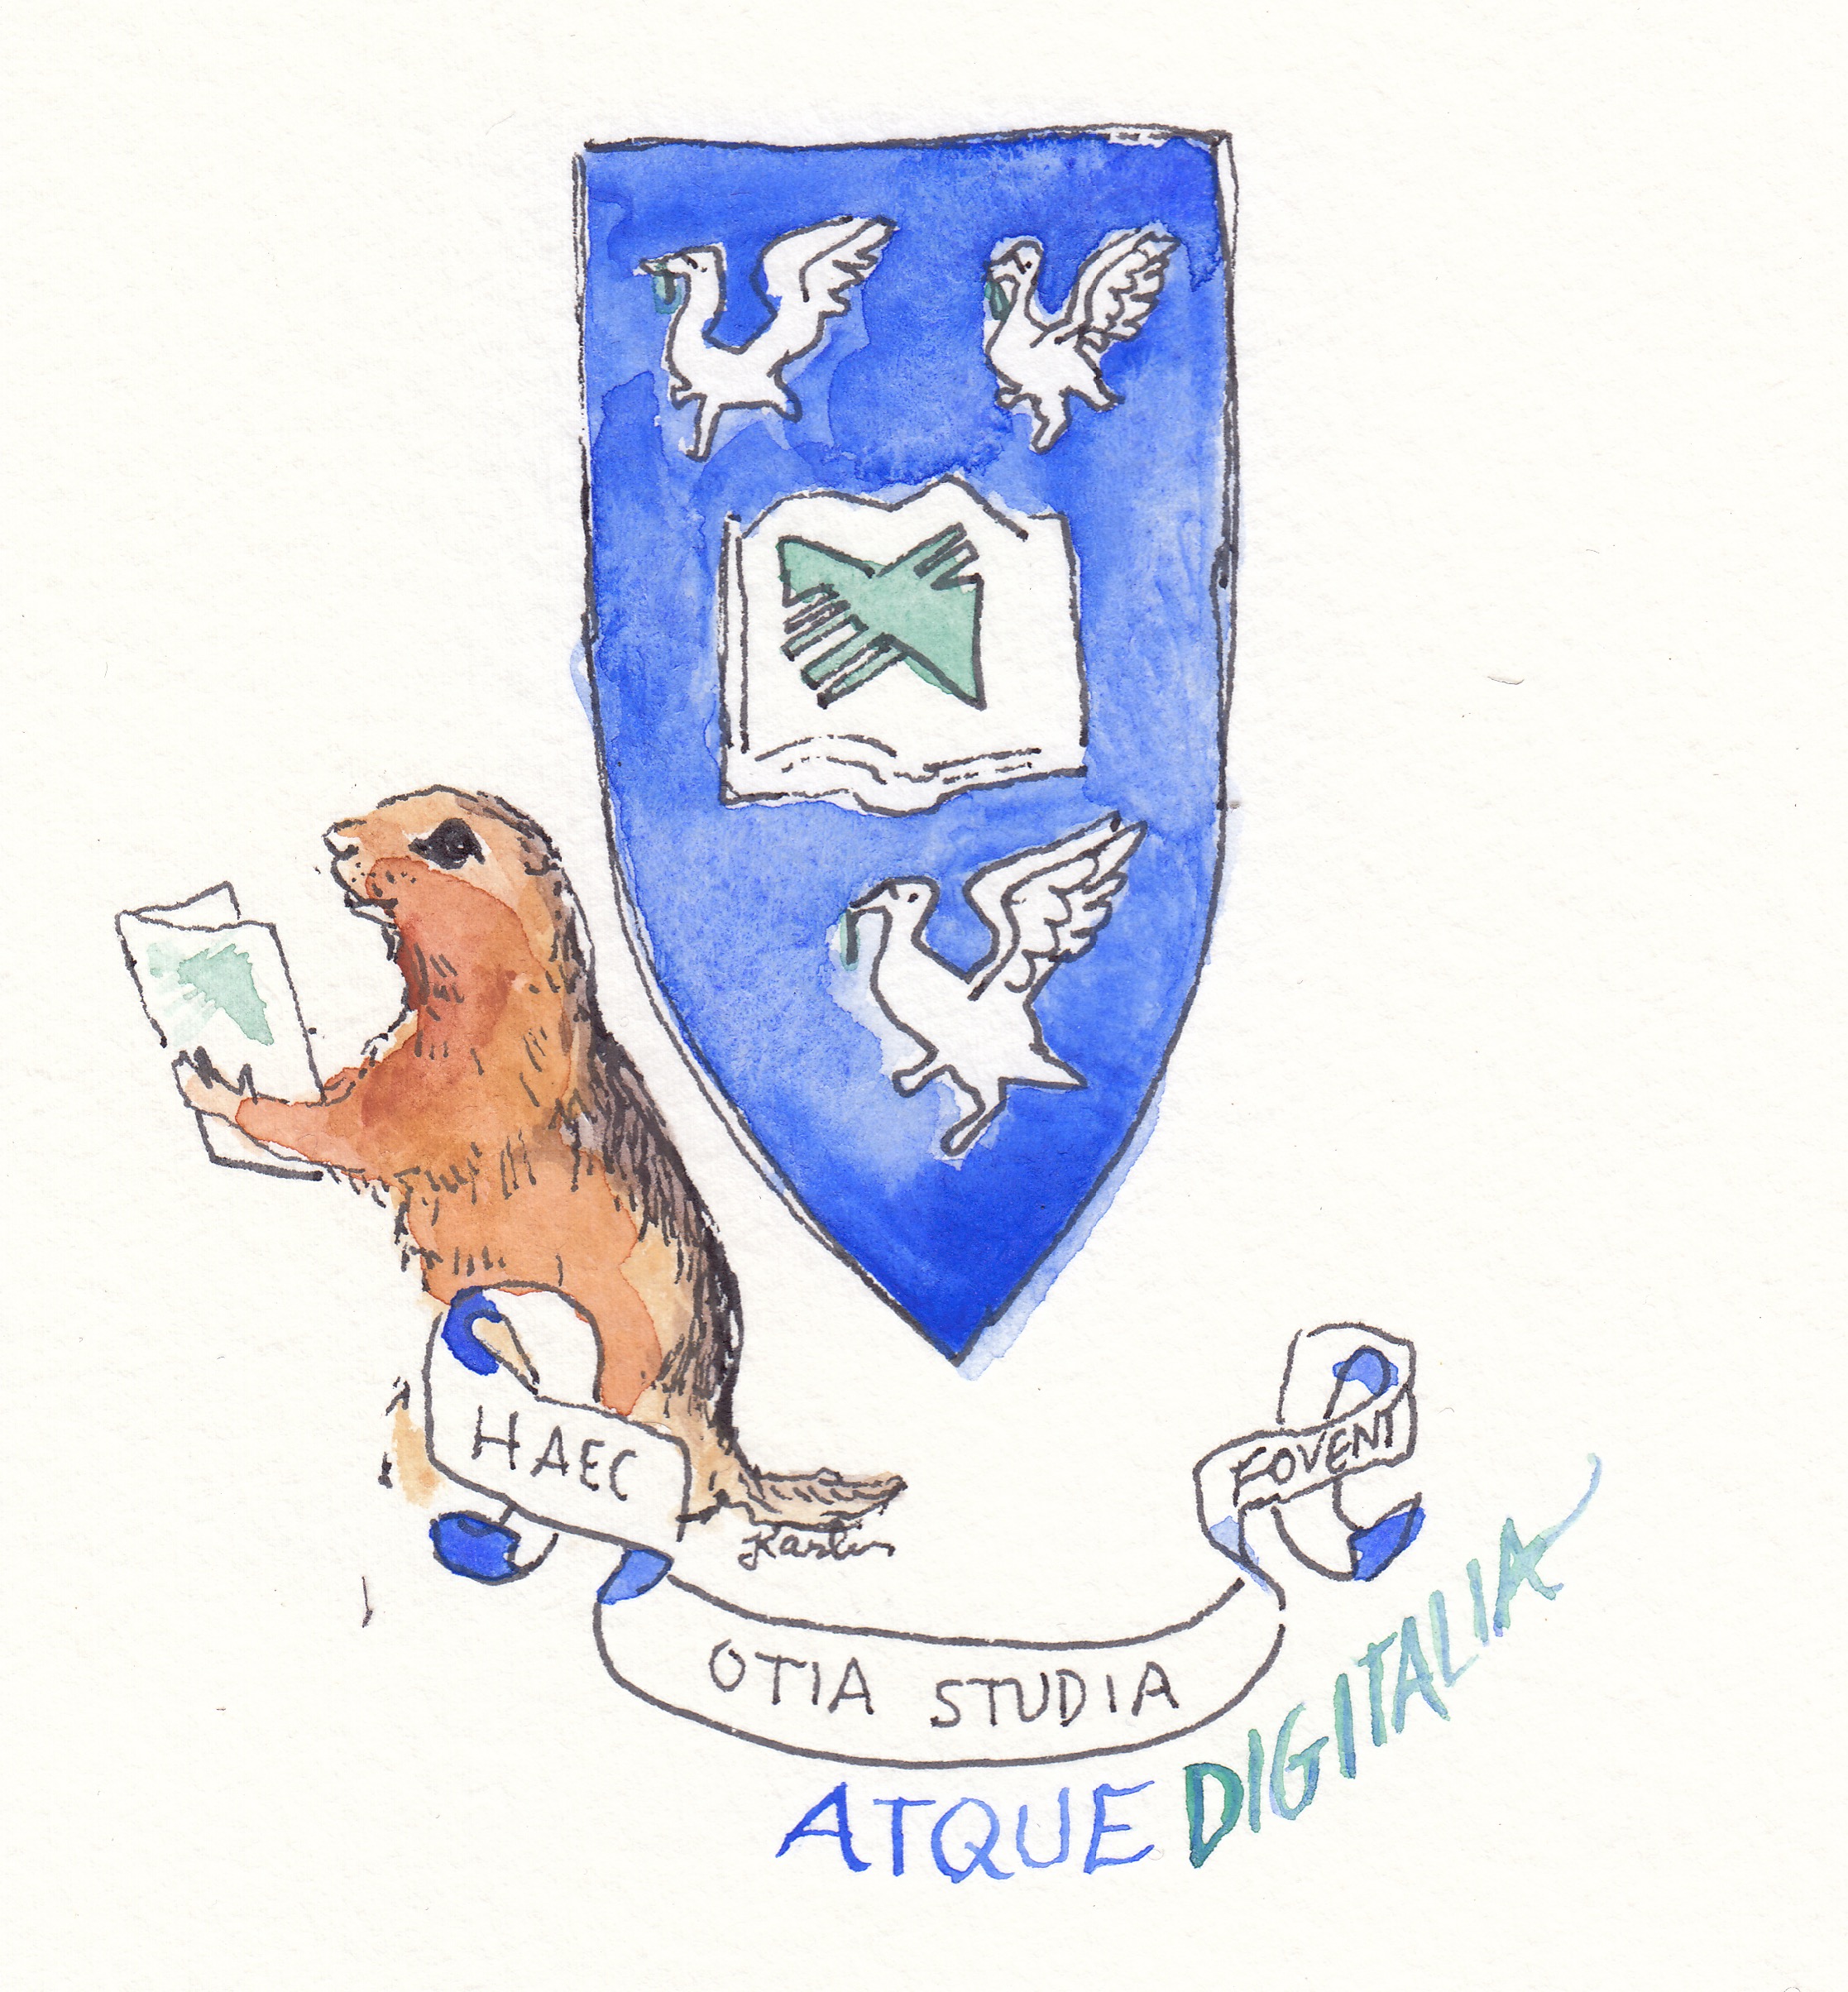 cartoon of gopher holding Manifold book in front of Liverpool U crest and motto